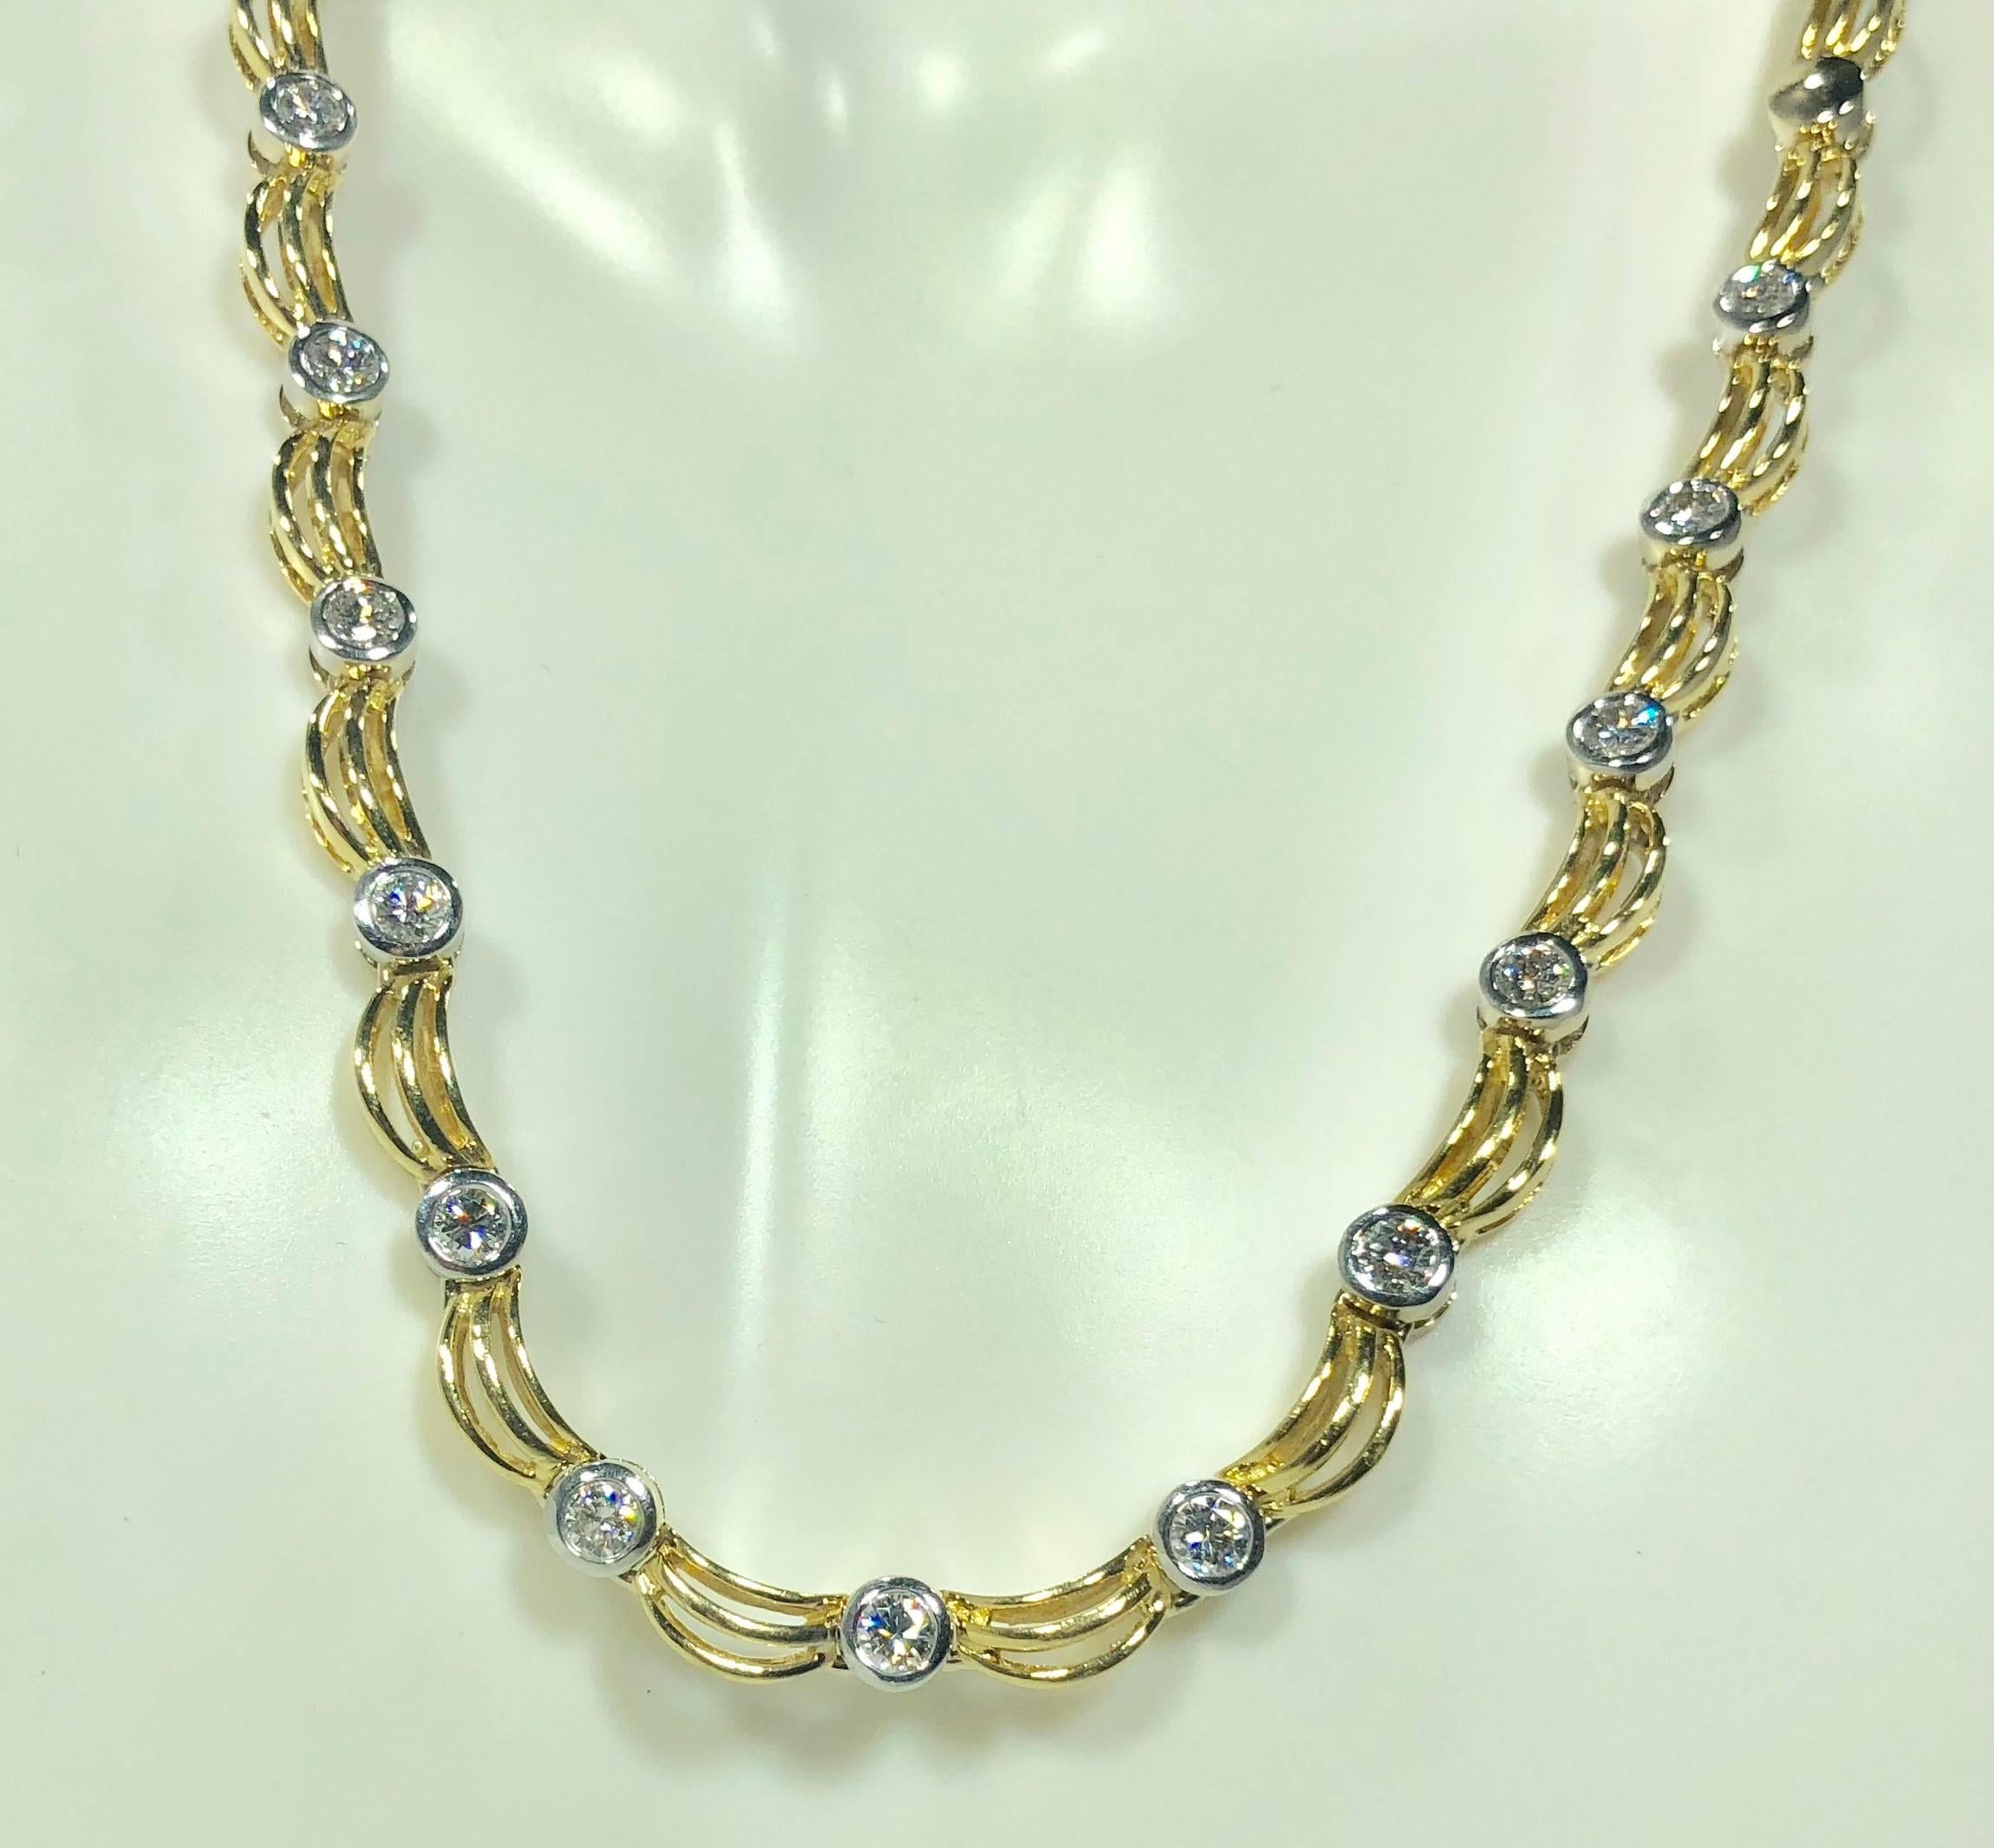 Round Cut 18 Karat Two-Tone Yellow/ White Gold and 1.0 Carat Diamond Fancy Link Necklace